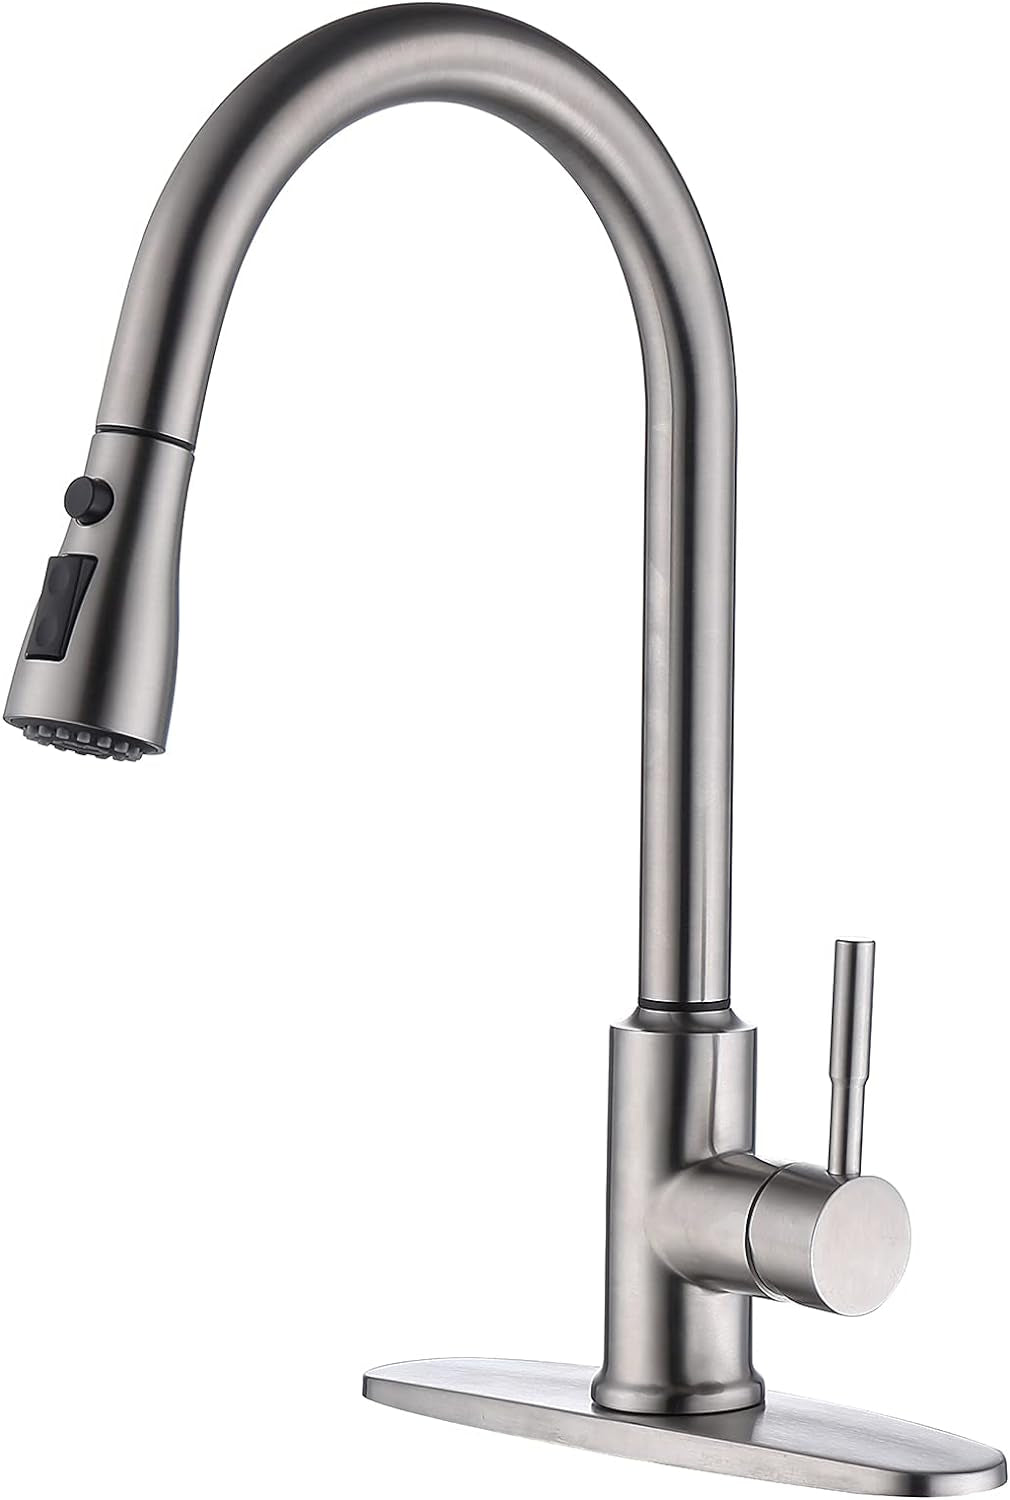 Kitchen Sink Faucet with Pull Out Sprayer, Fingerprint Resistant, Single Hole Deck Mount, Single Handle 304 Stainless Steel Kitchen Faucet, Brushed Nickel